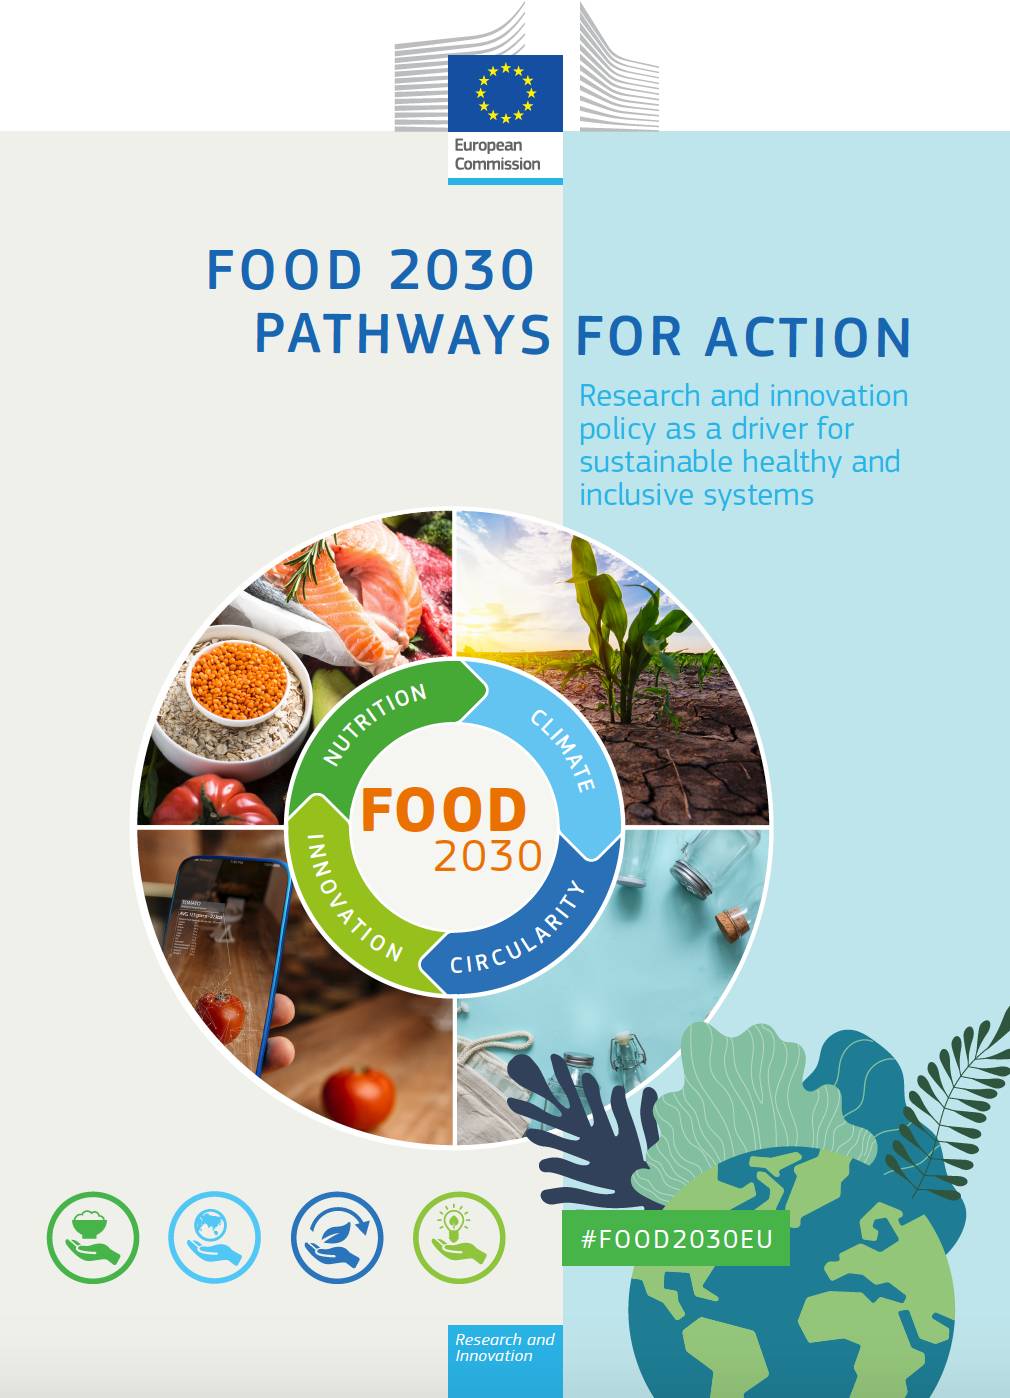 Food 2030 Pathways for Action